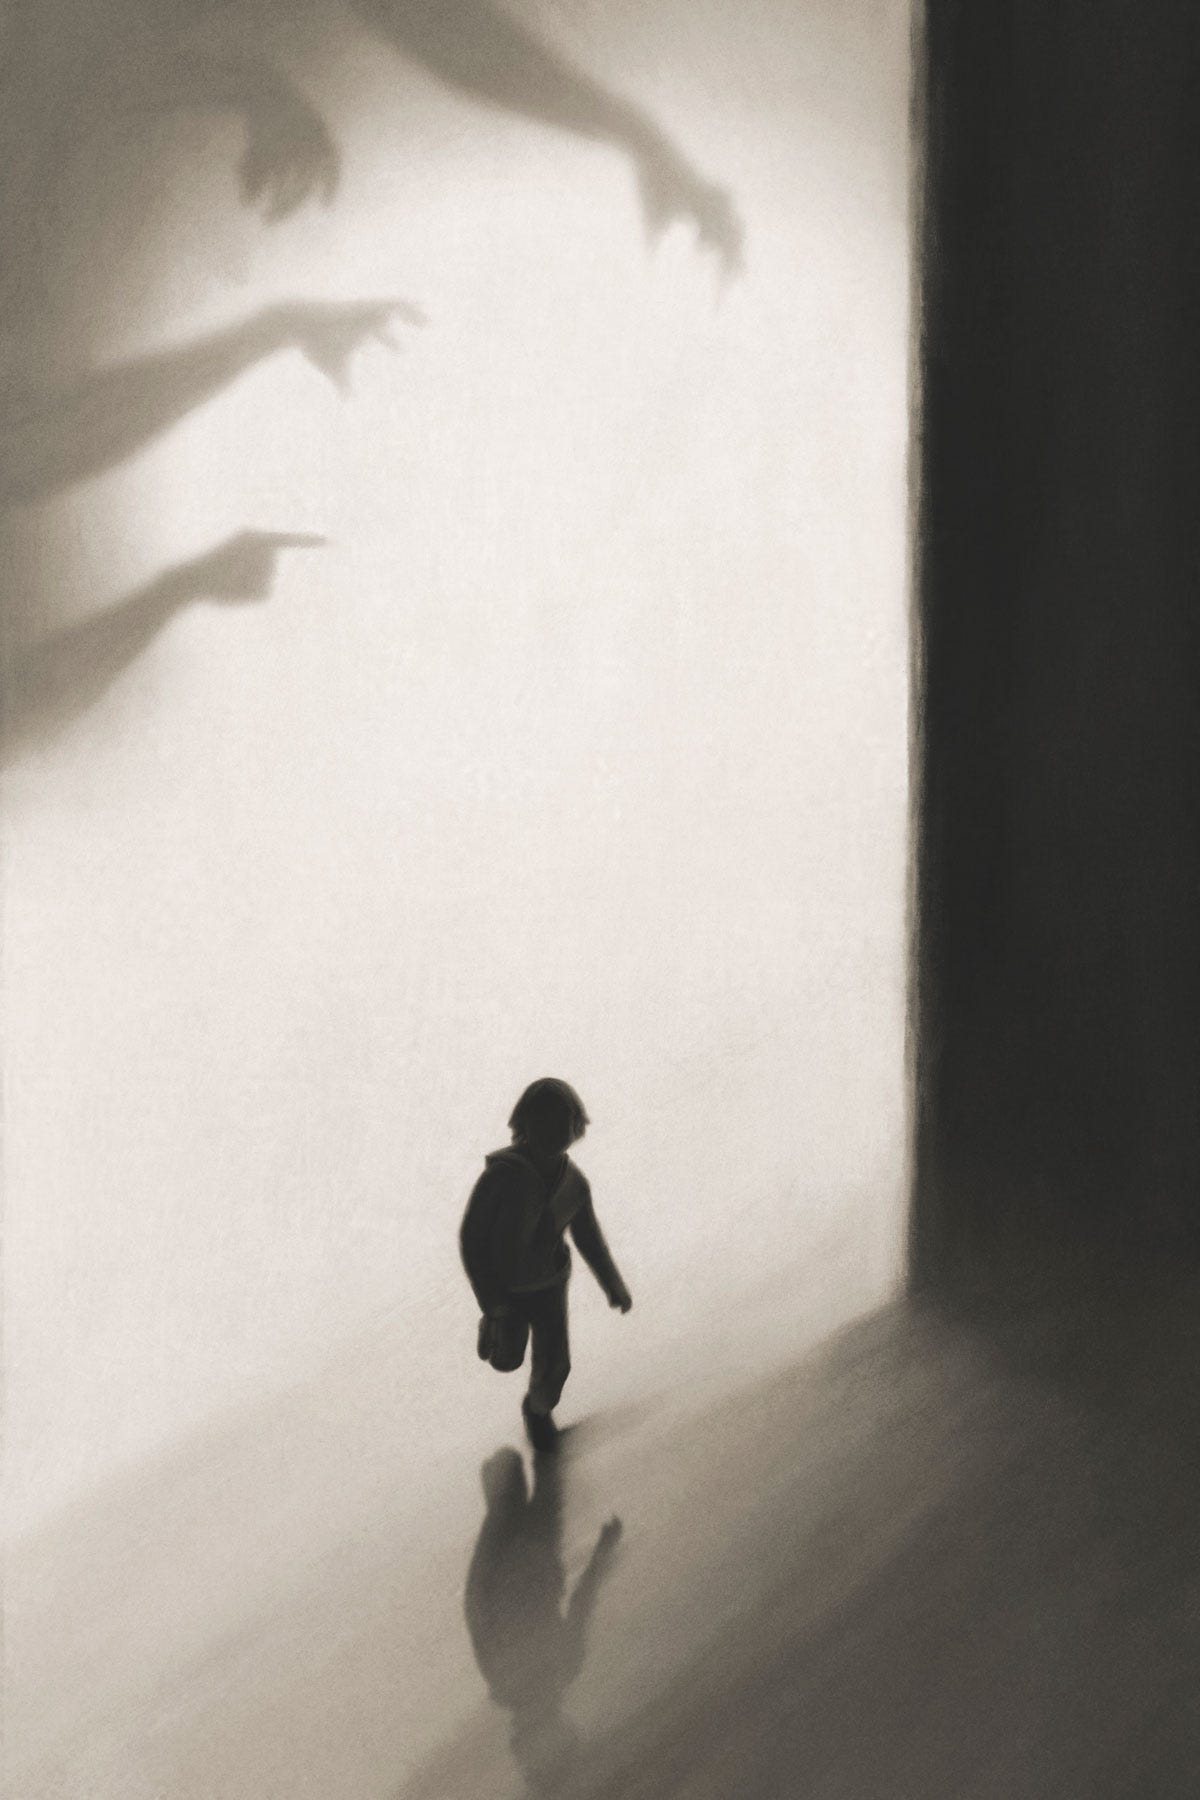 50 Reasons to Give Your Child the COVID Shot: Child Running from Scary Shadows of Hands on Wall